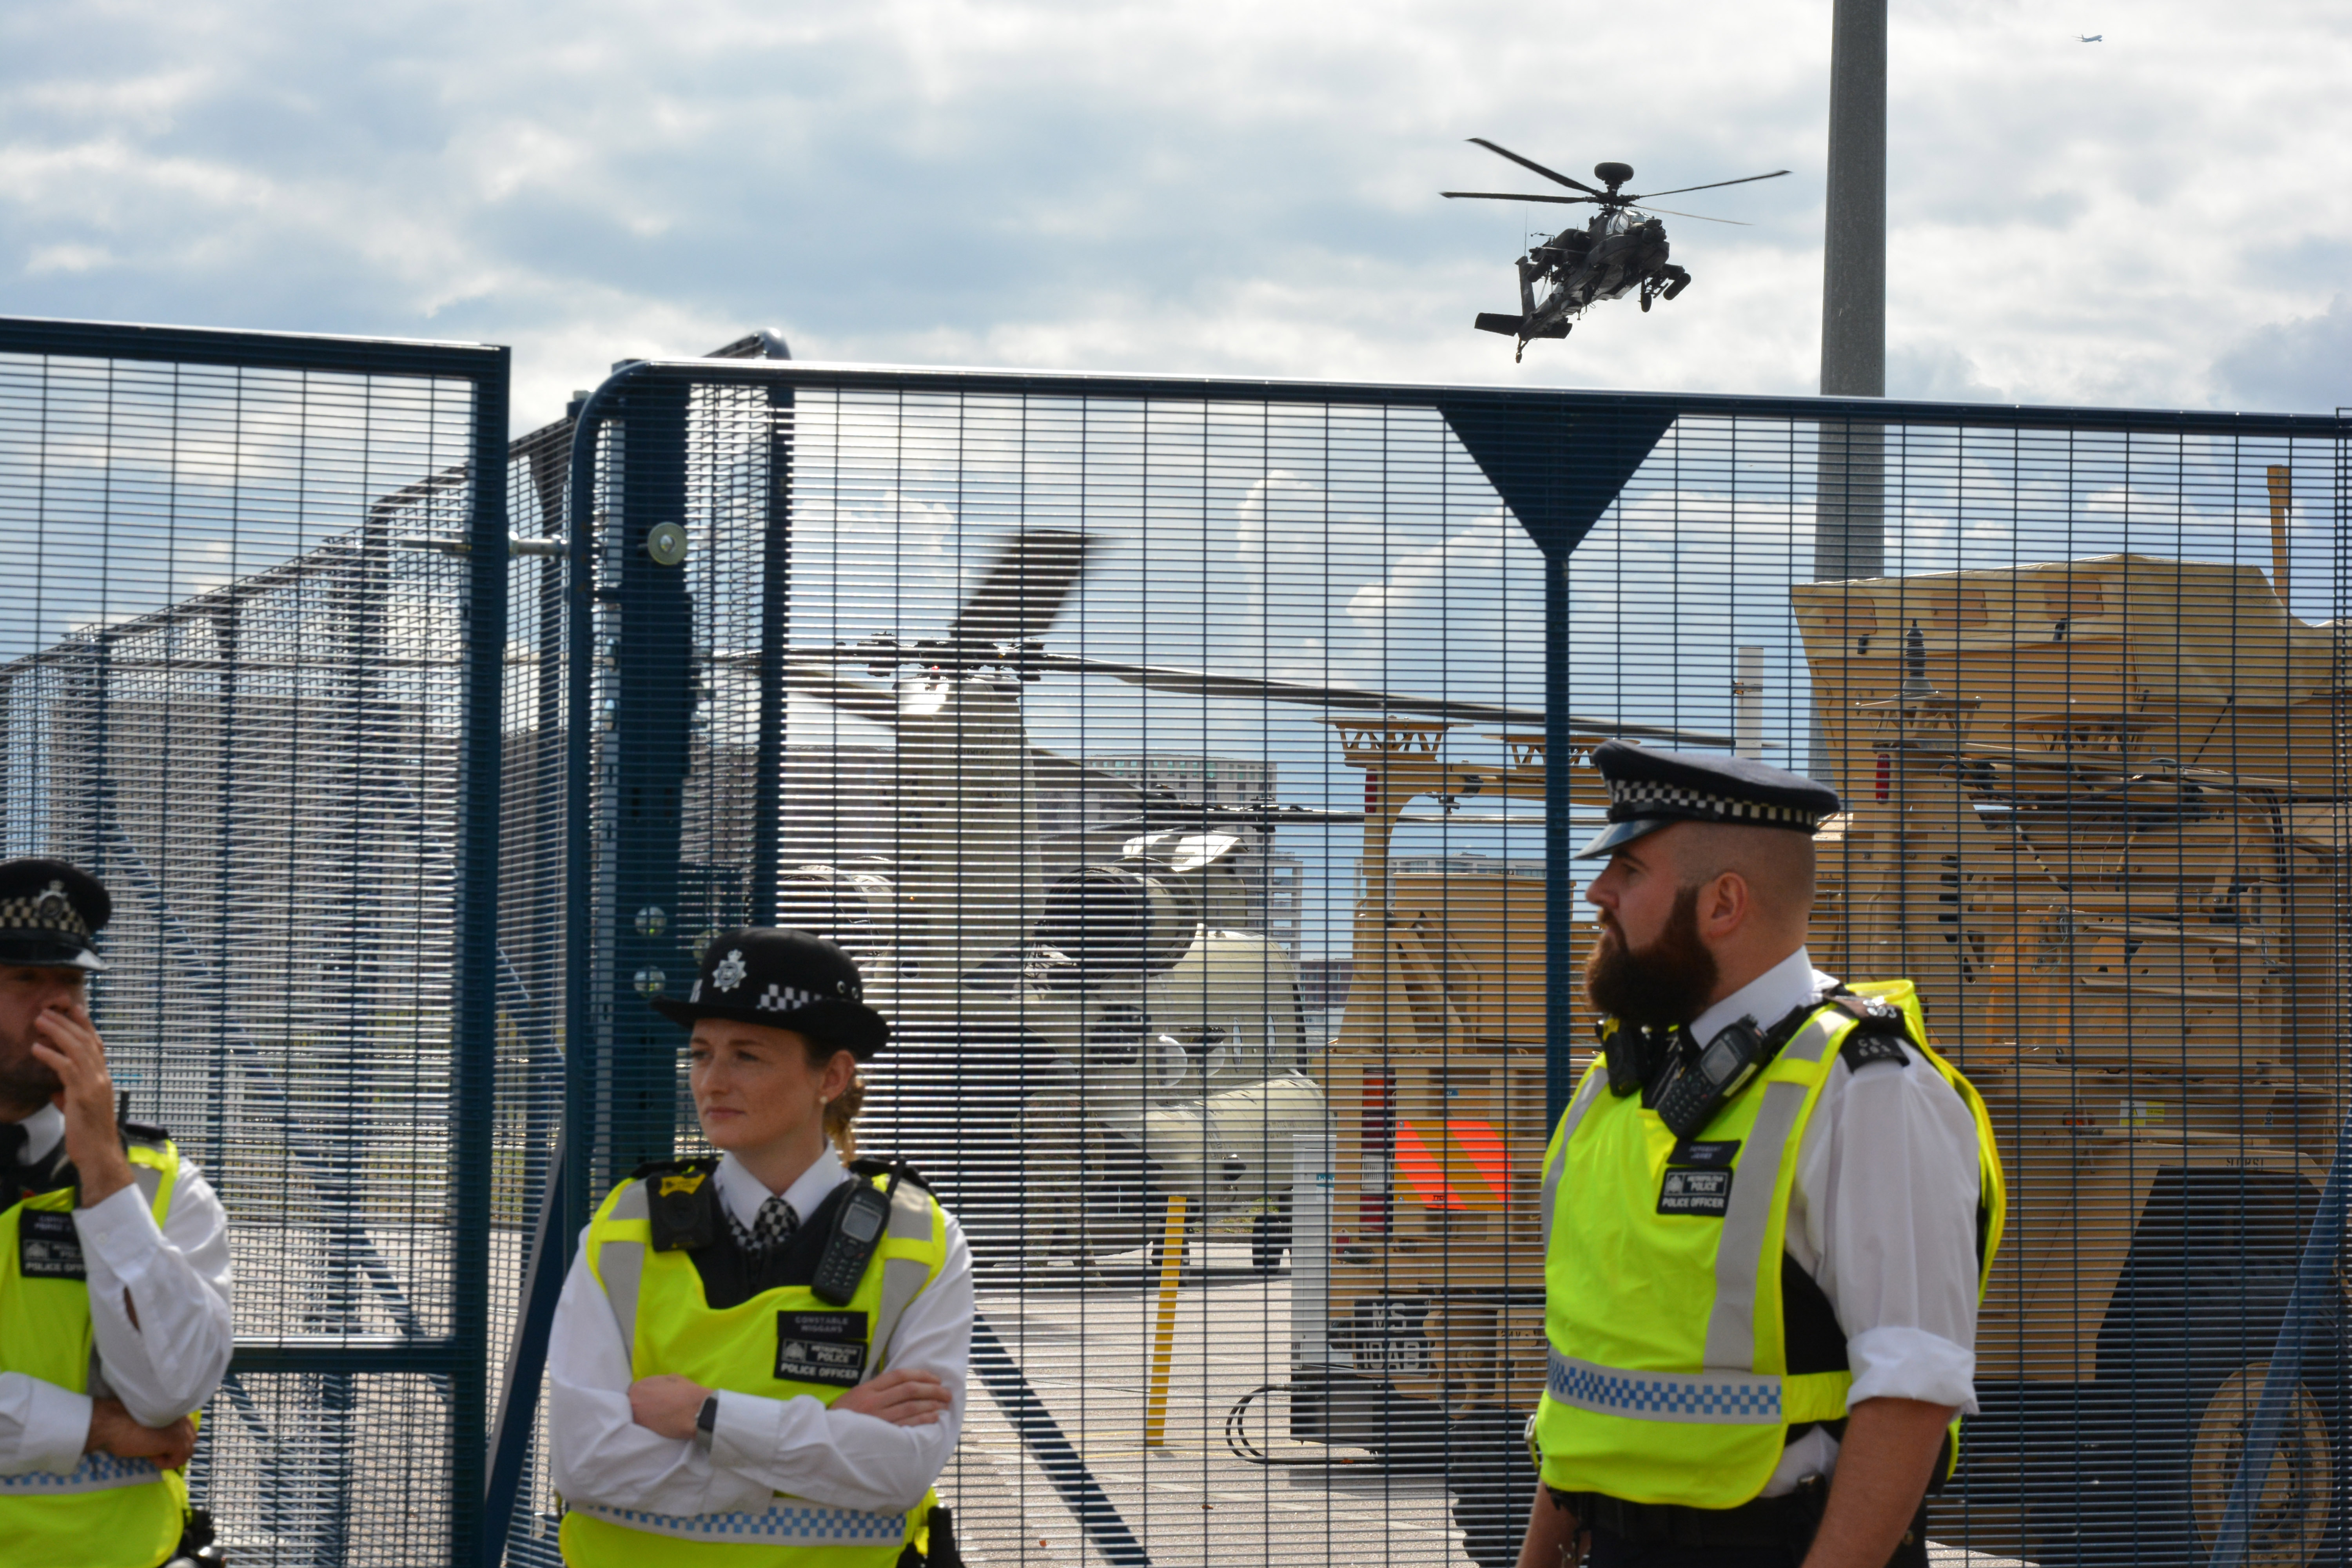 Helicopter arrives at DSEI arms fair